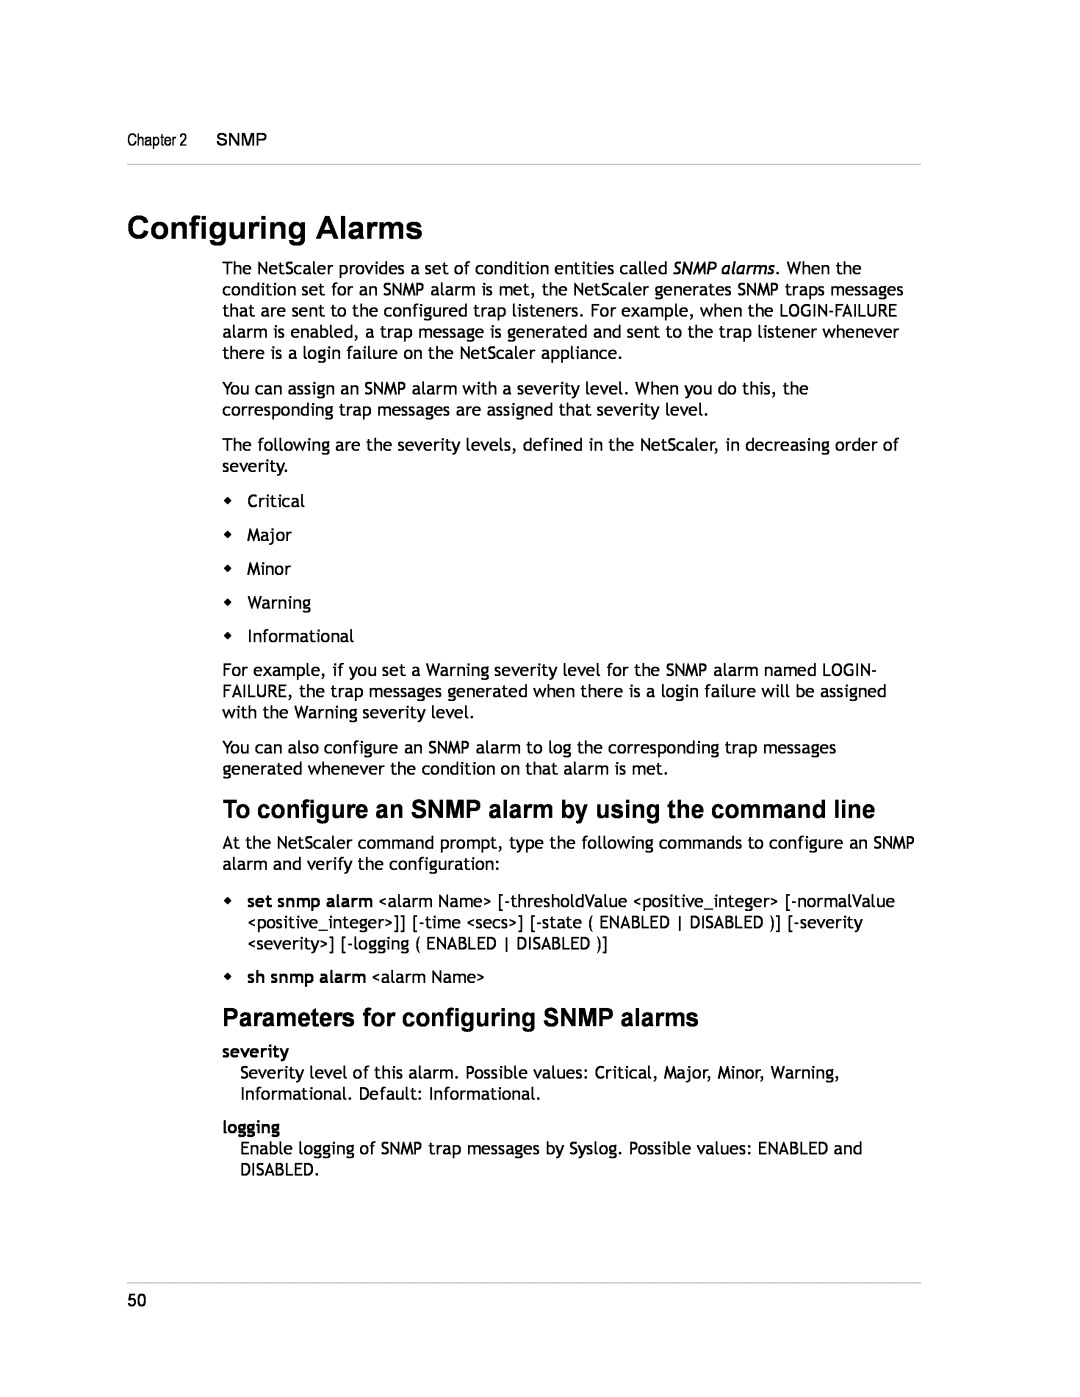 Citrix Systems CITRIX NETSCALER 9.3 Configuring Alarms, To configure an SNMP alarm by using the command line, severity 